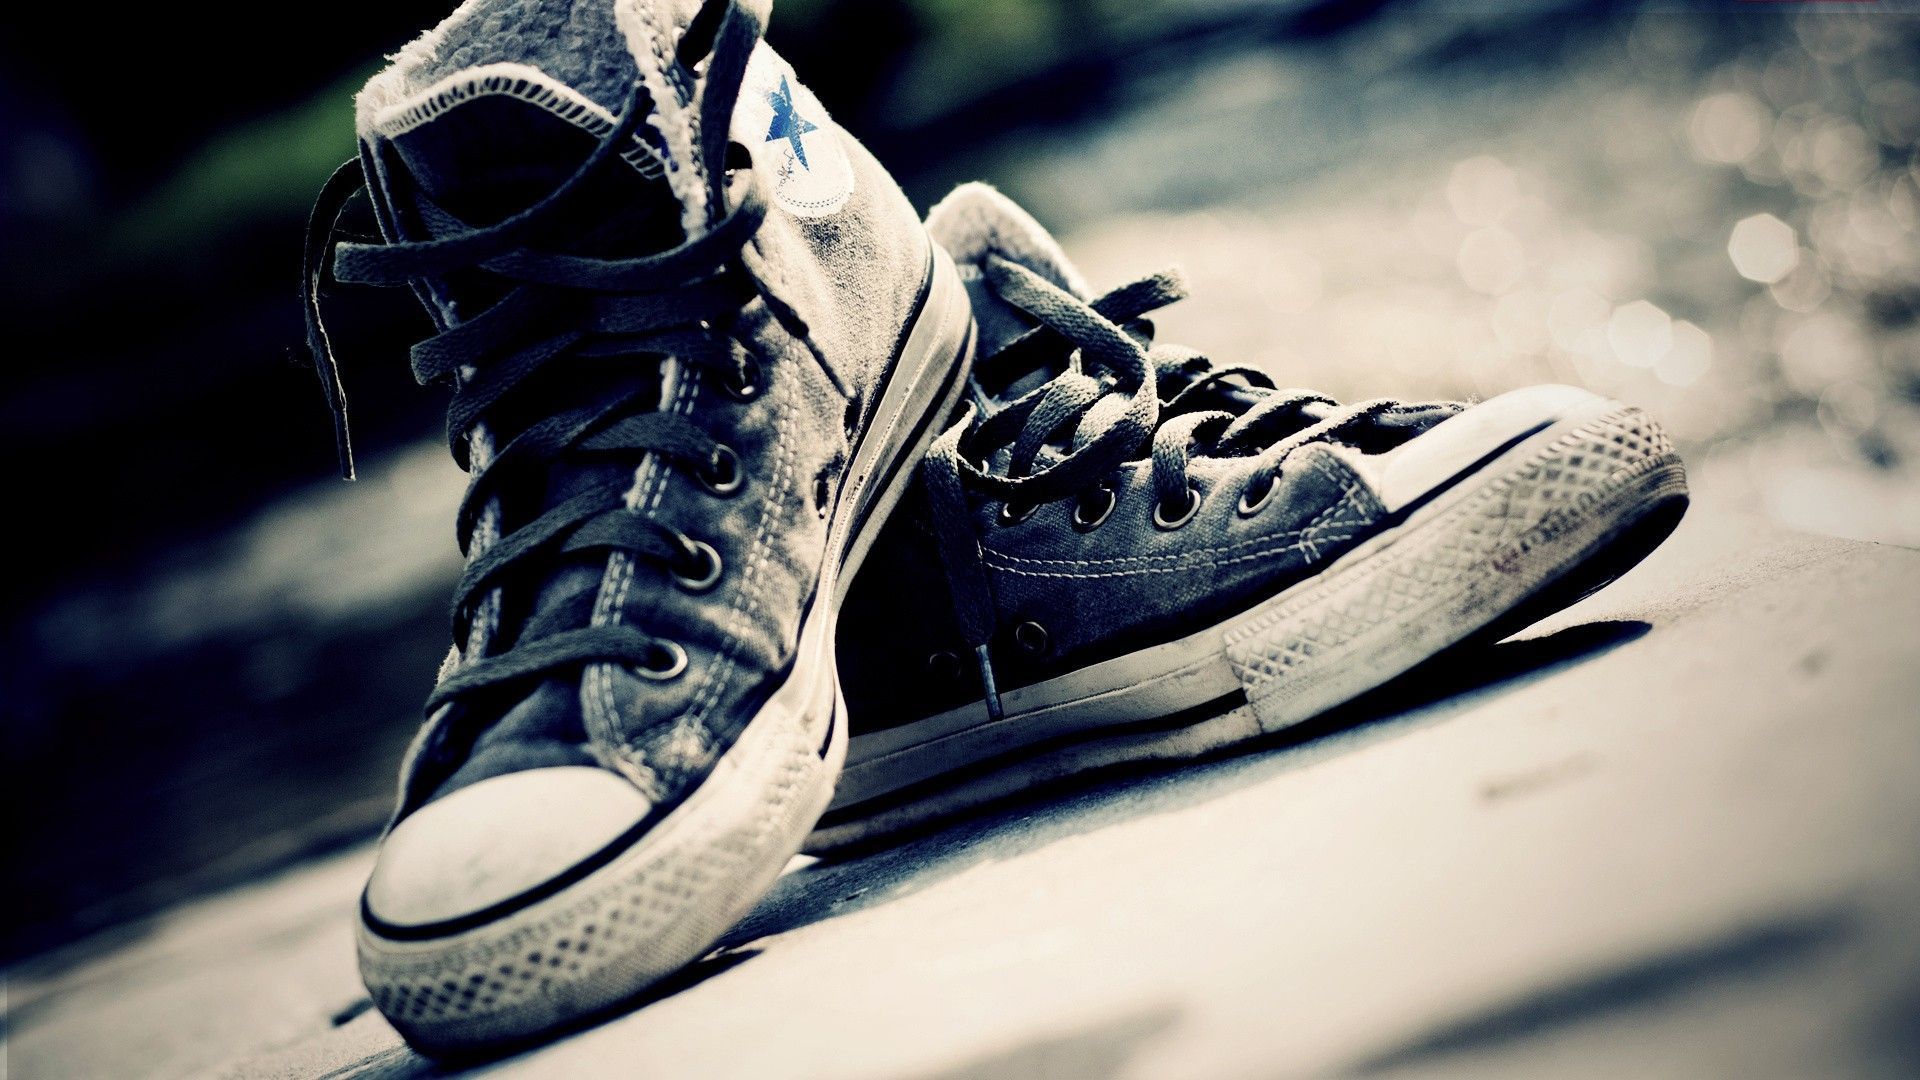 Cool shoes 1080P 2K 4K 5K HD wallpapers free download  Wallpaper Flare